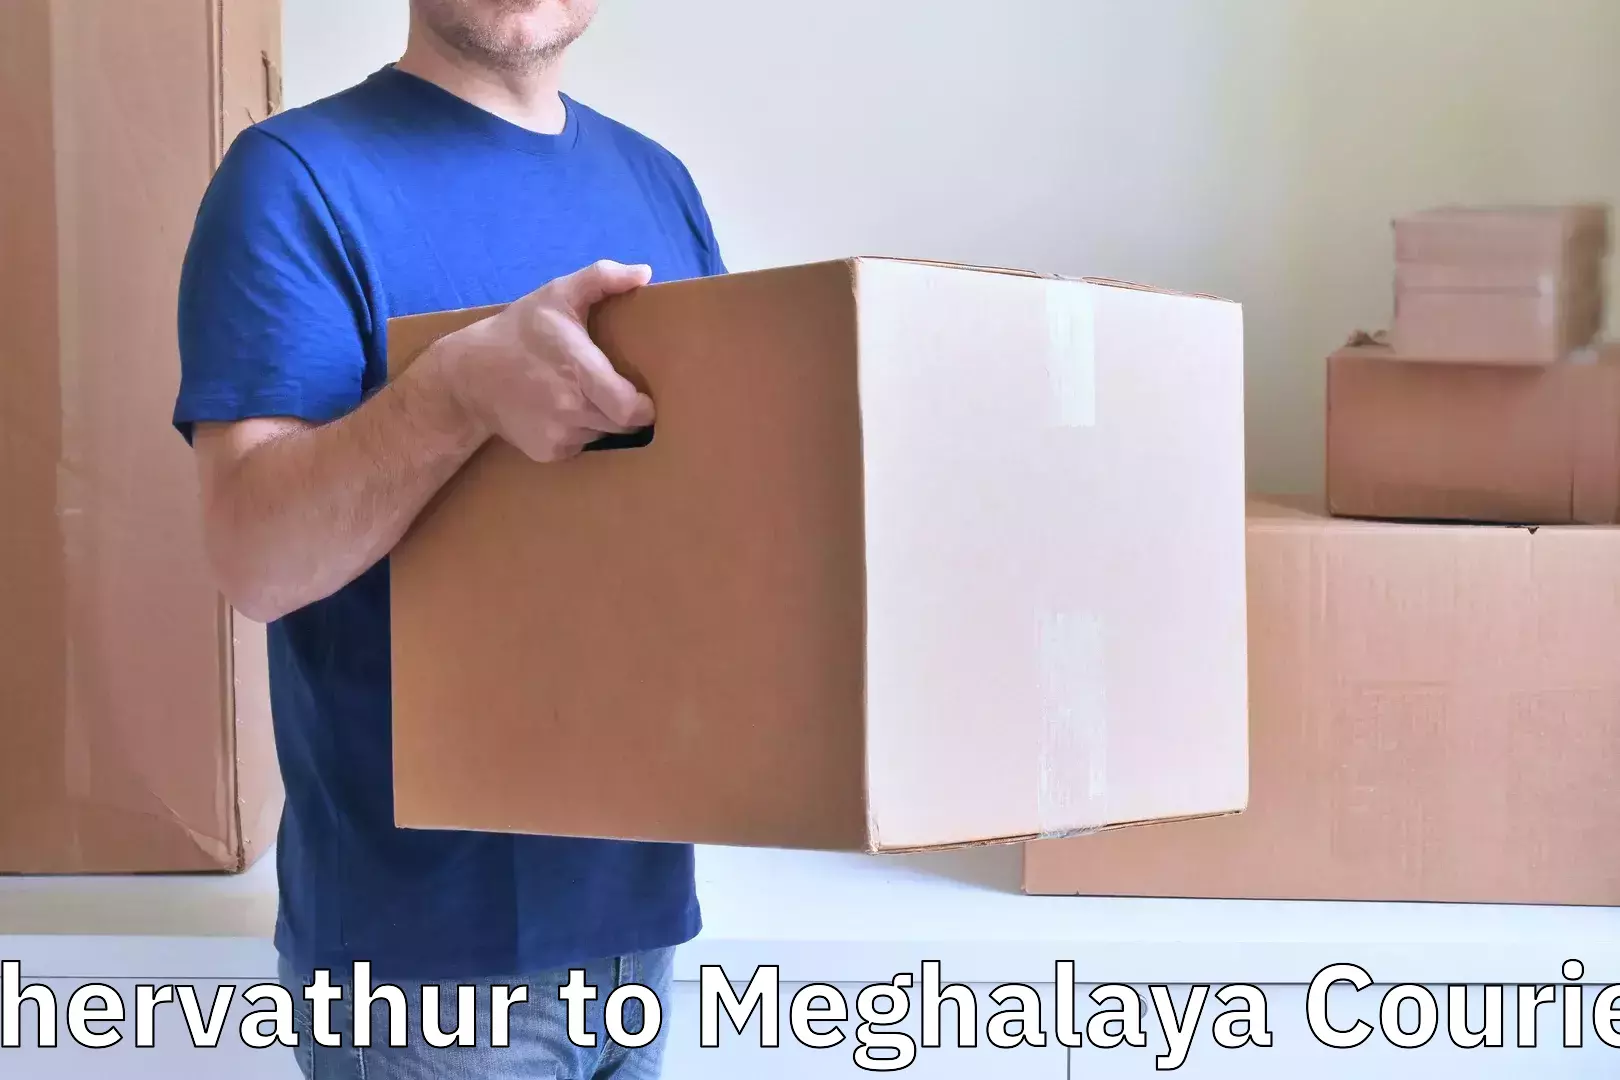 Electronic items luggage shipping Chervathur to Tura